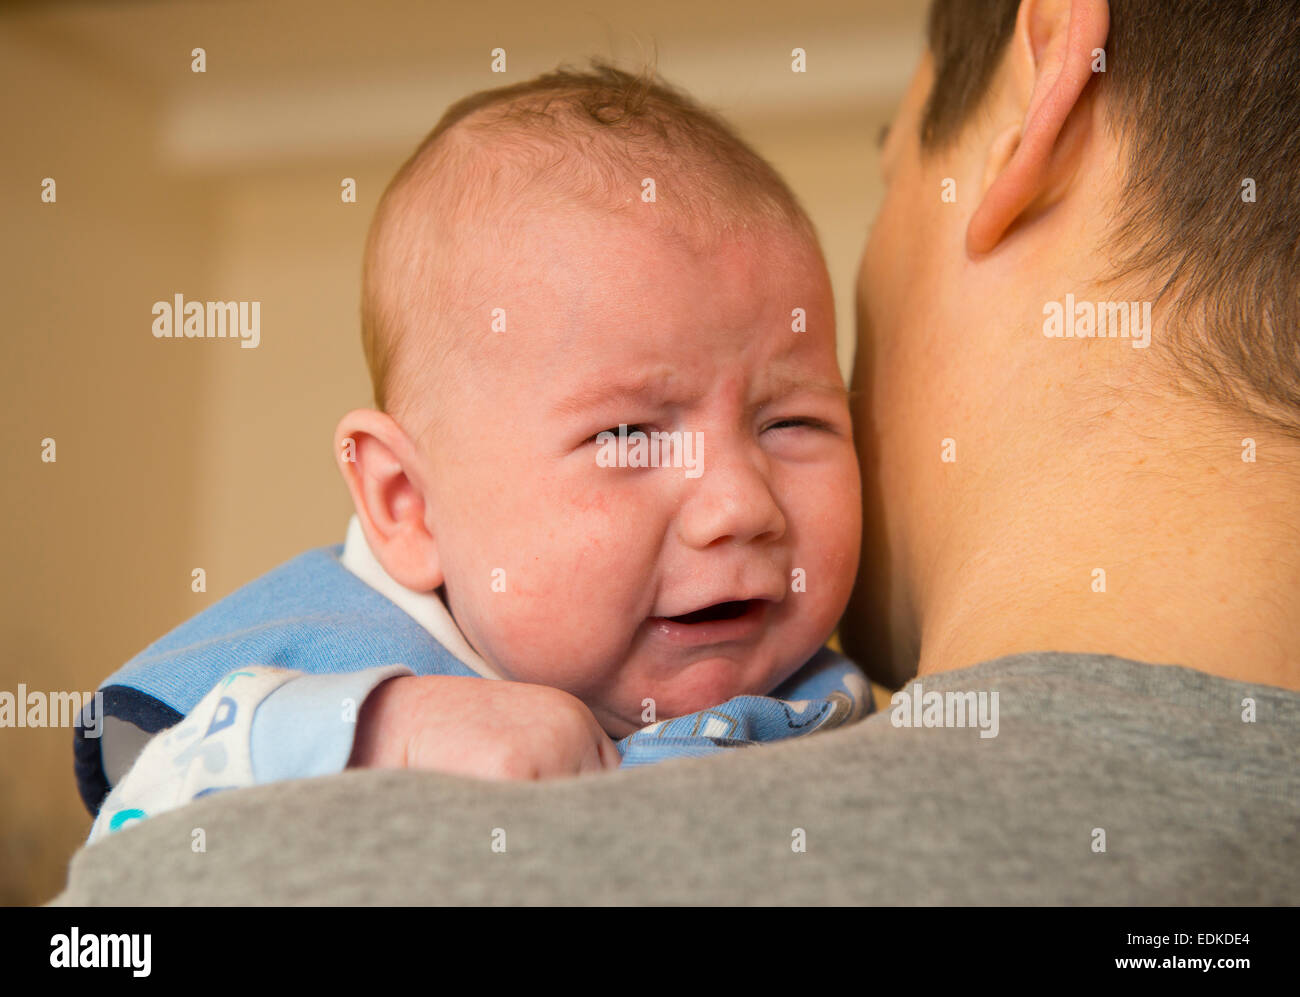 A two month old baby crying while being held. Stock Photo